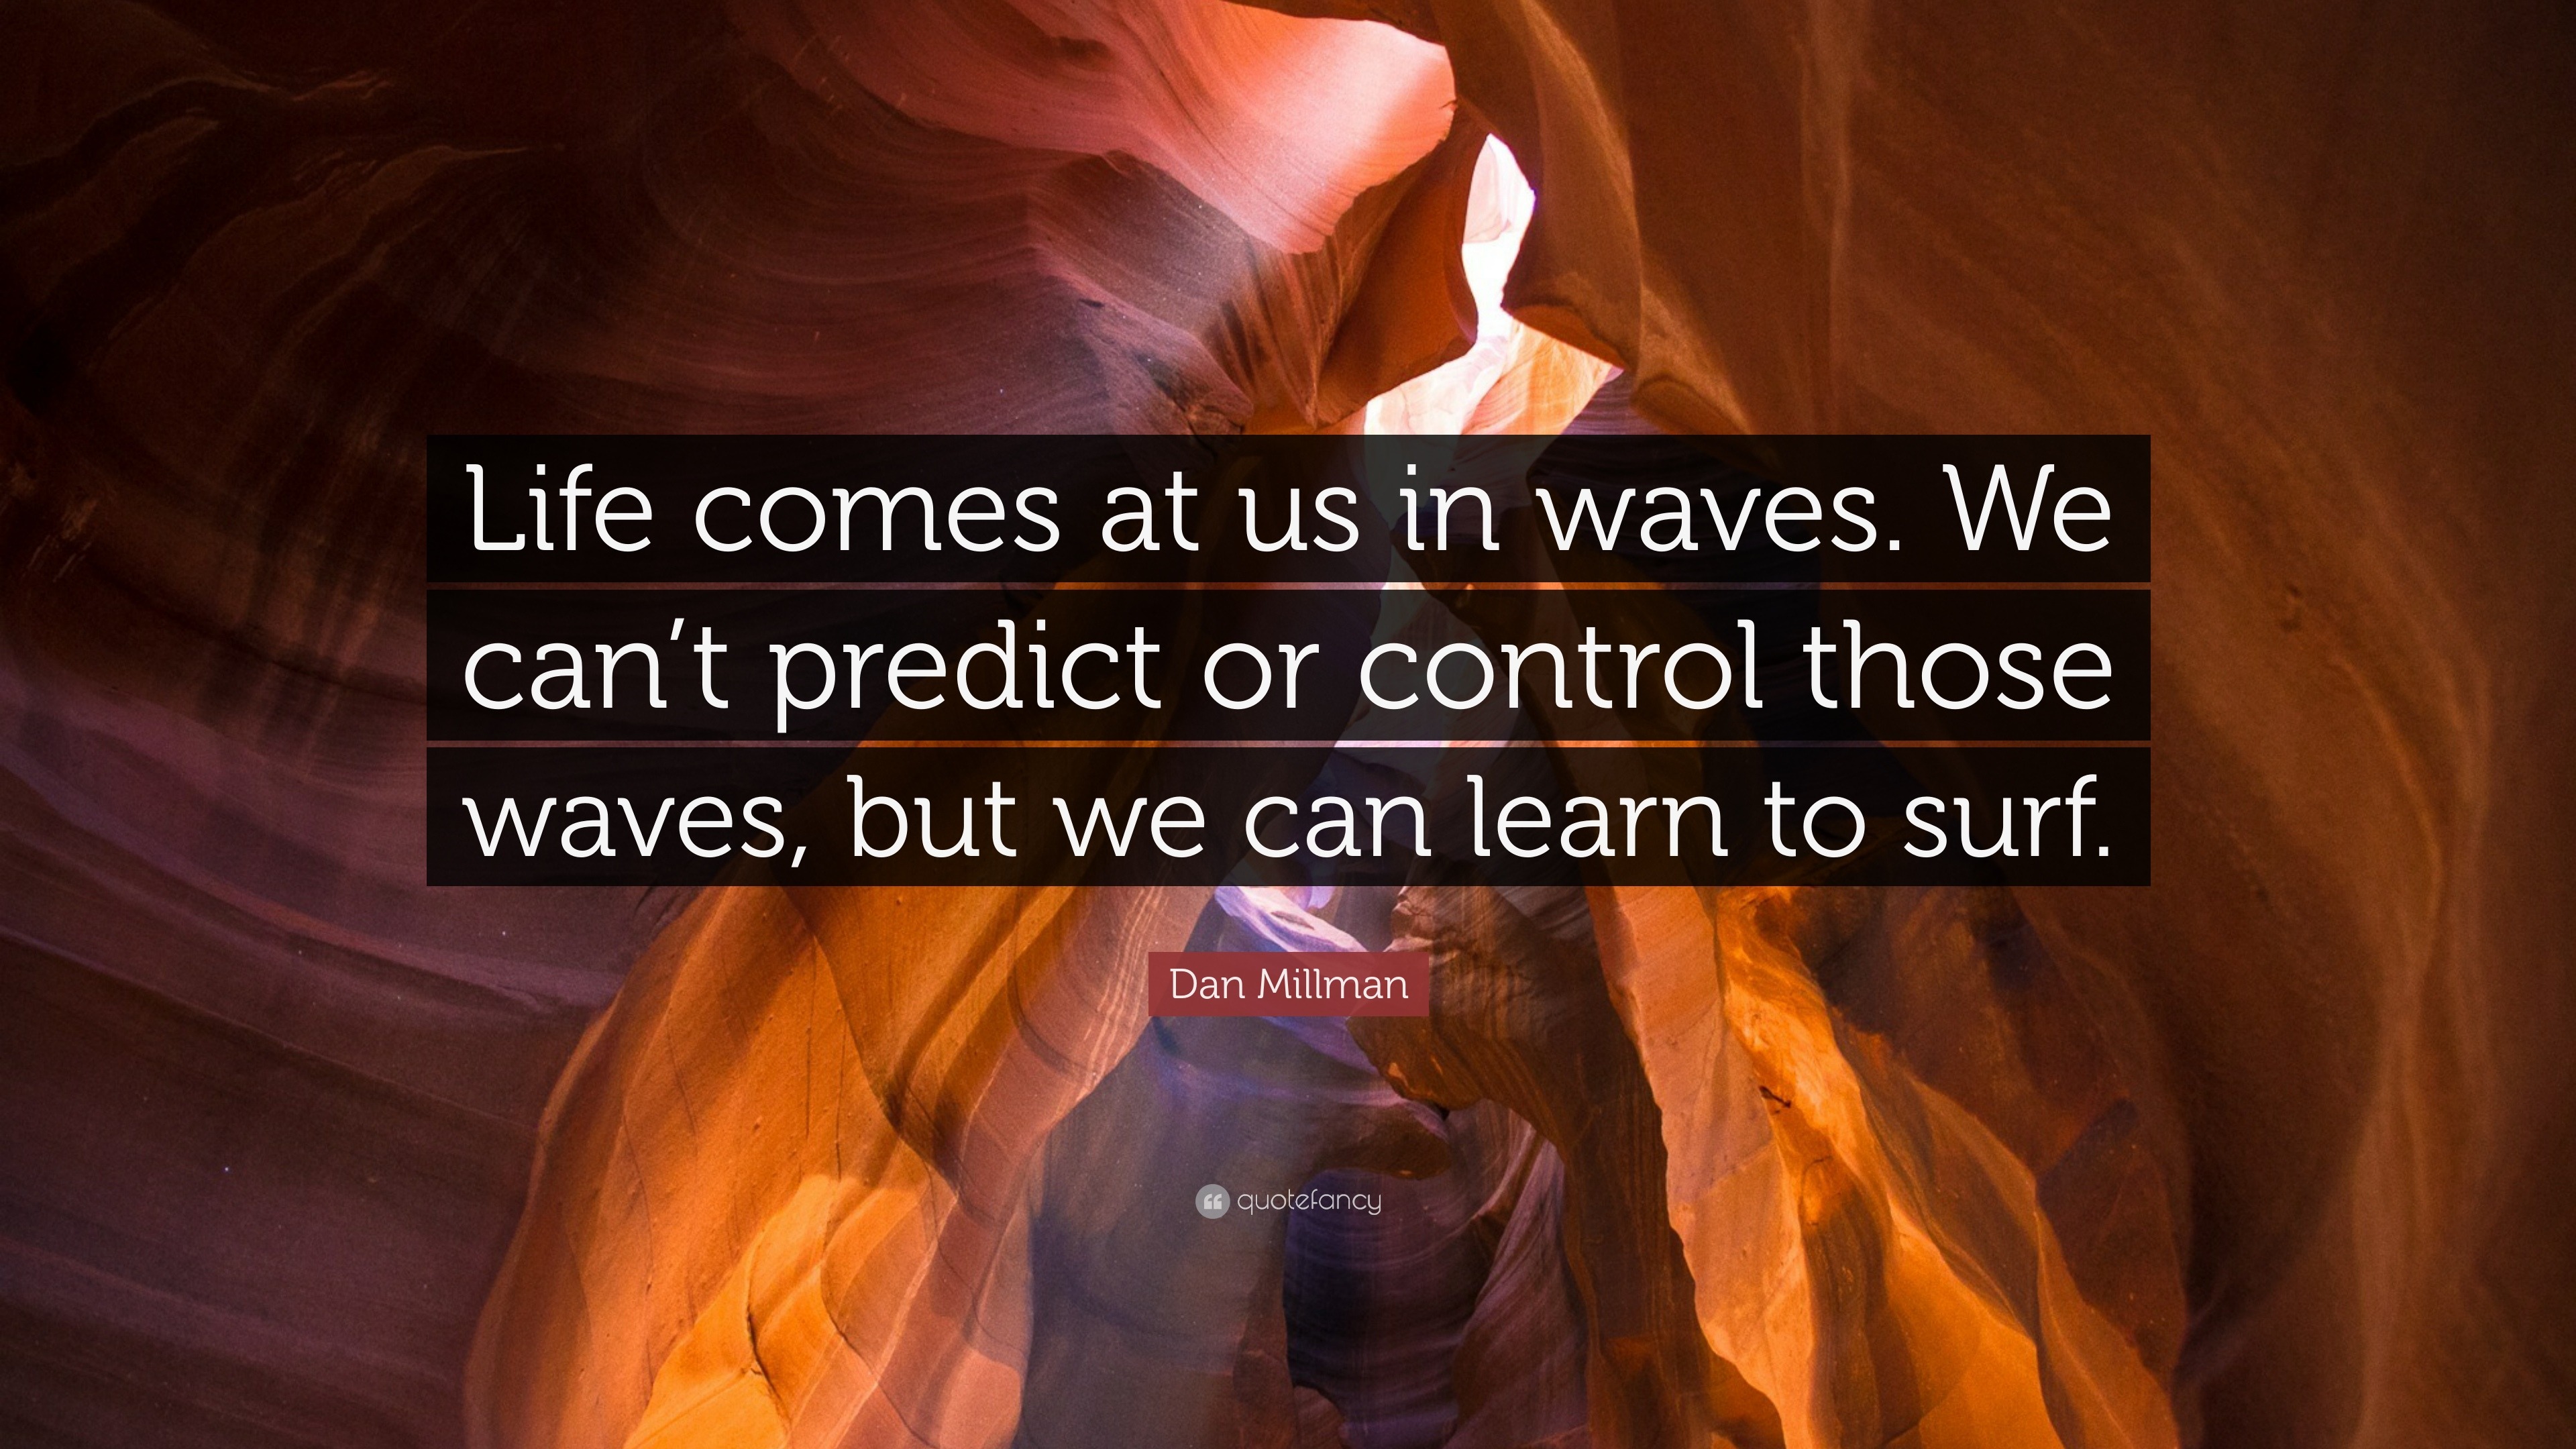 Dan Millman Quote: “Life comes at us in waves. We can't predict or control  those